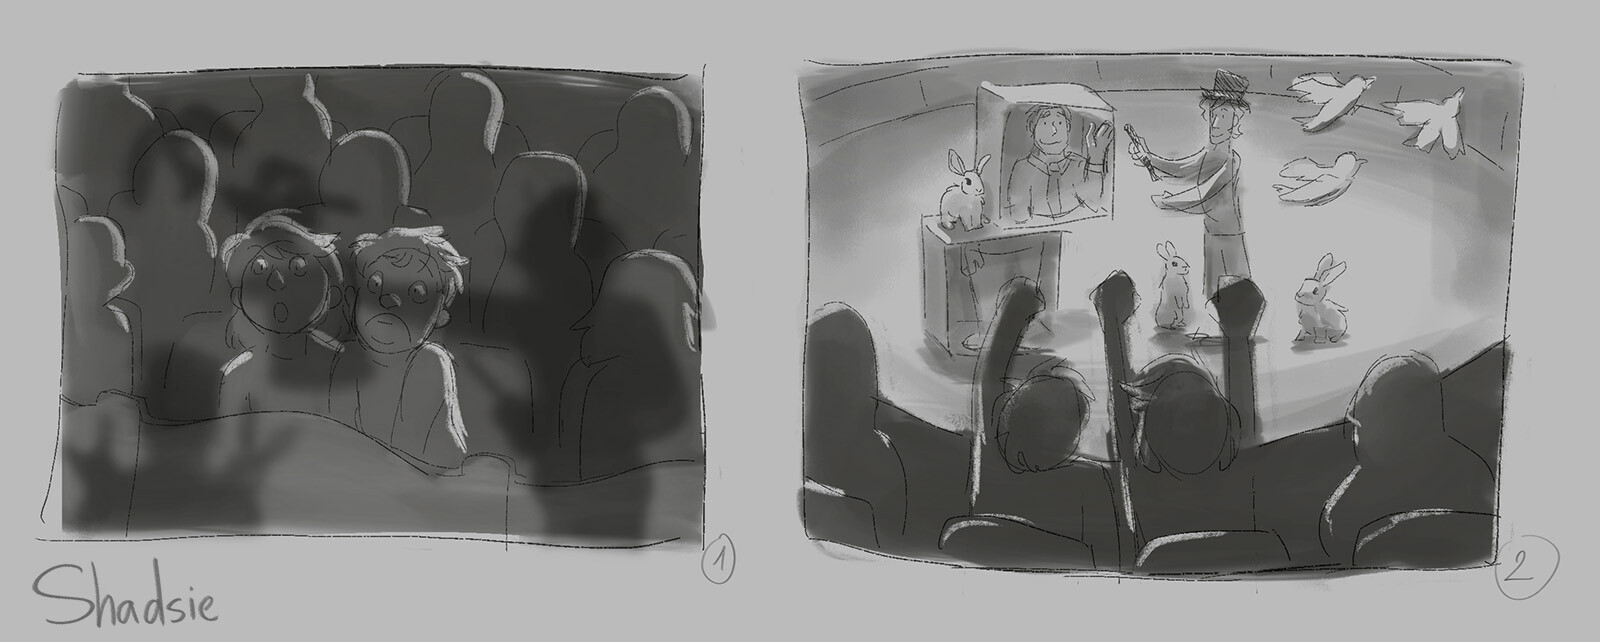 Two thumbnails to choose from - I preferred the other one conceptually, but we ended up wanting to show the magicians instead